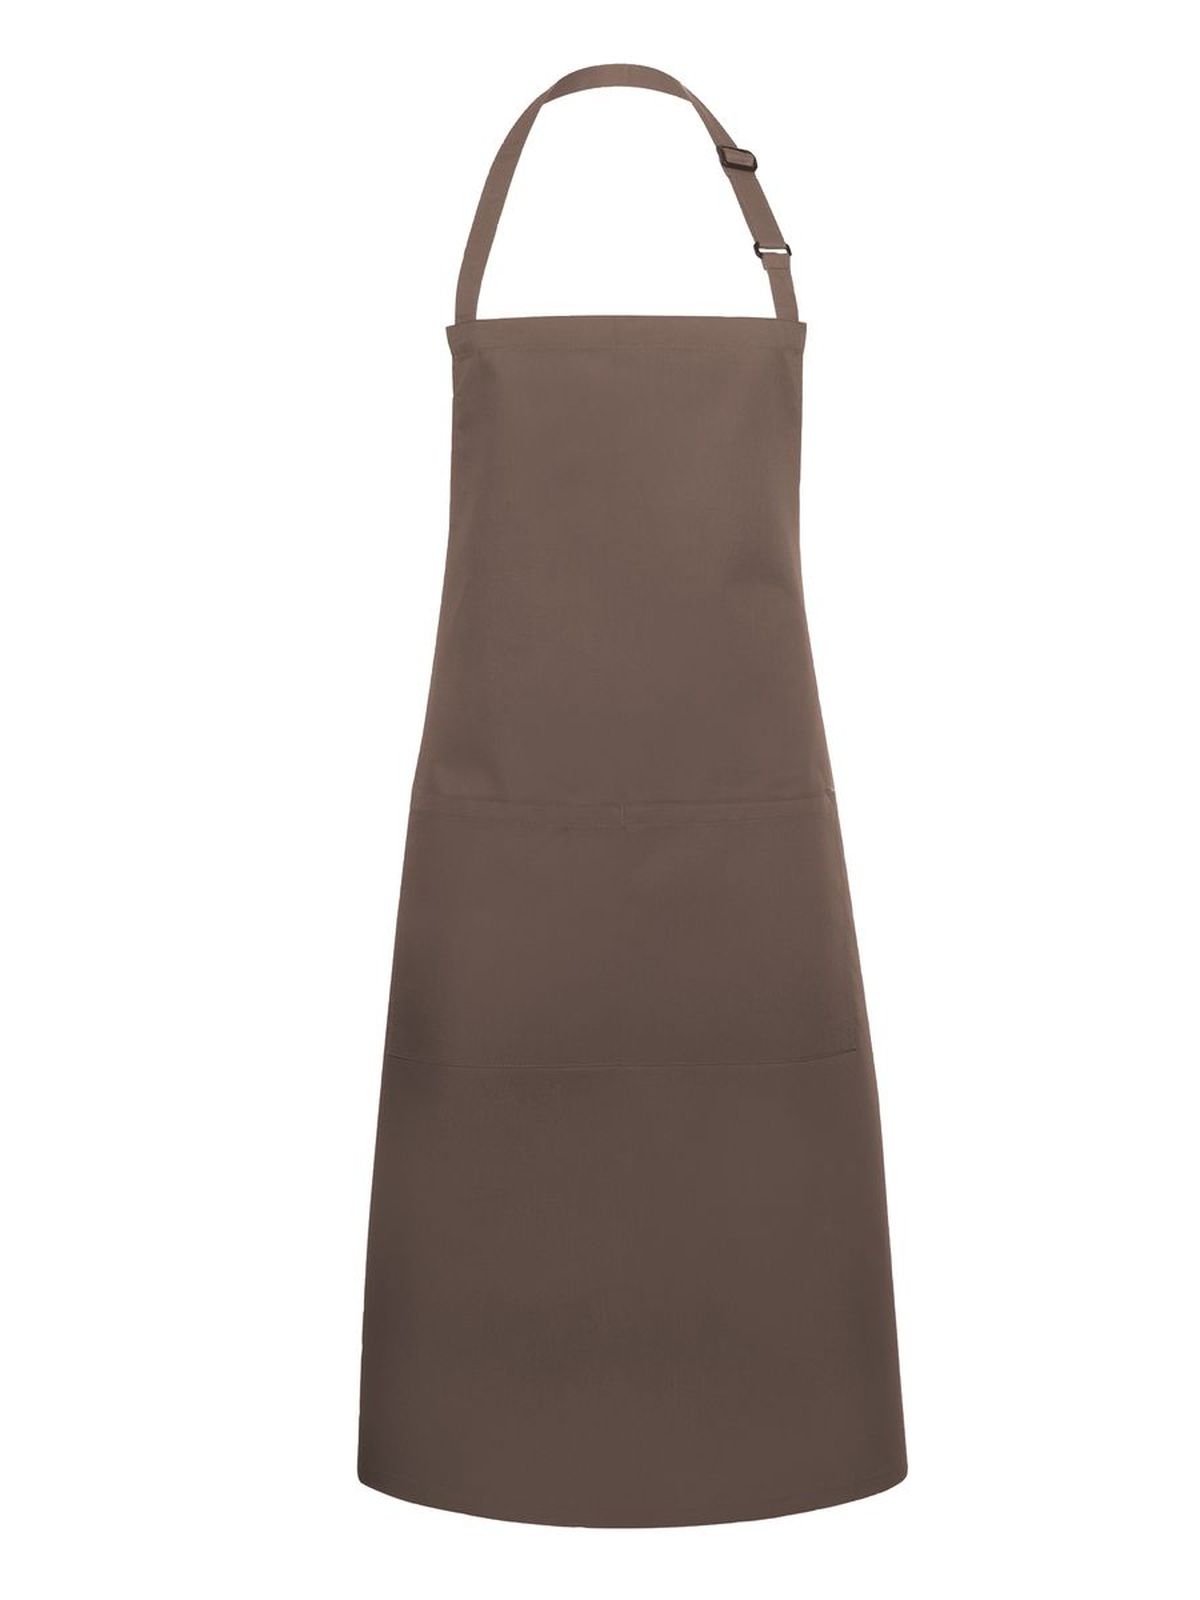 bistro-apron-basic-with-buckle-and-pocket-light-brown.webp